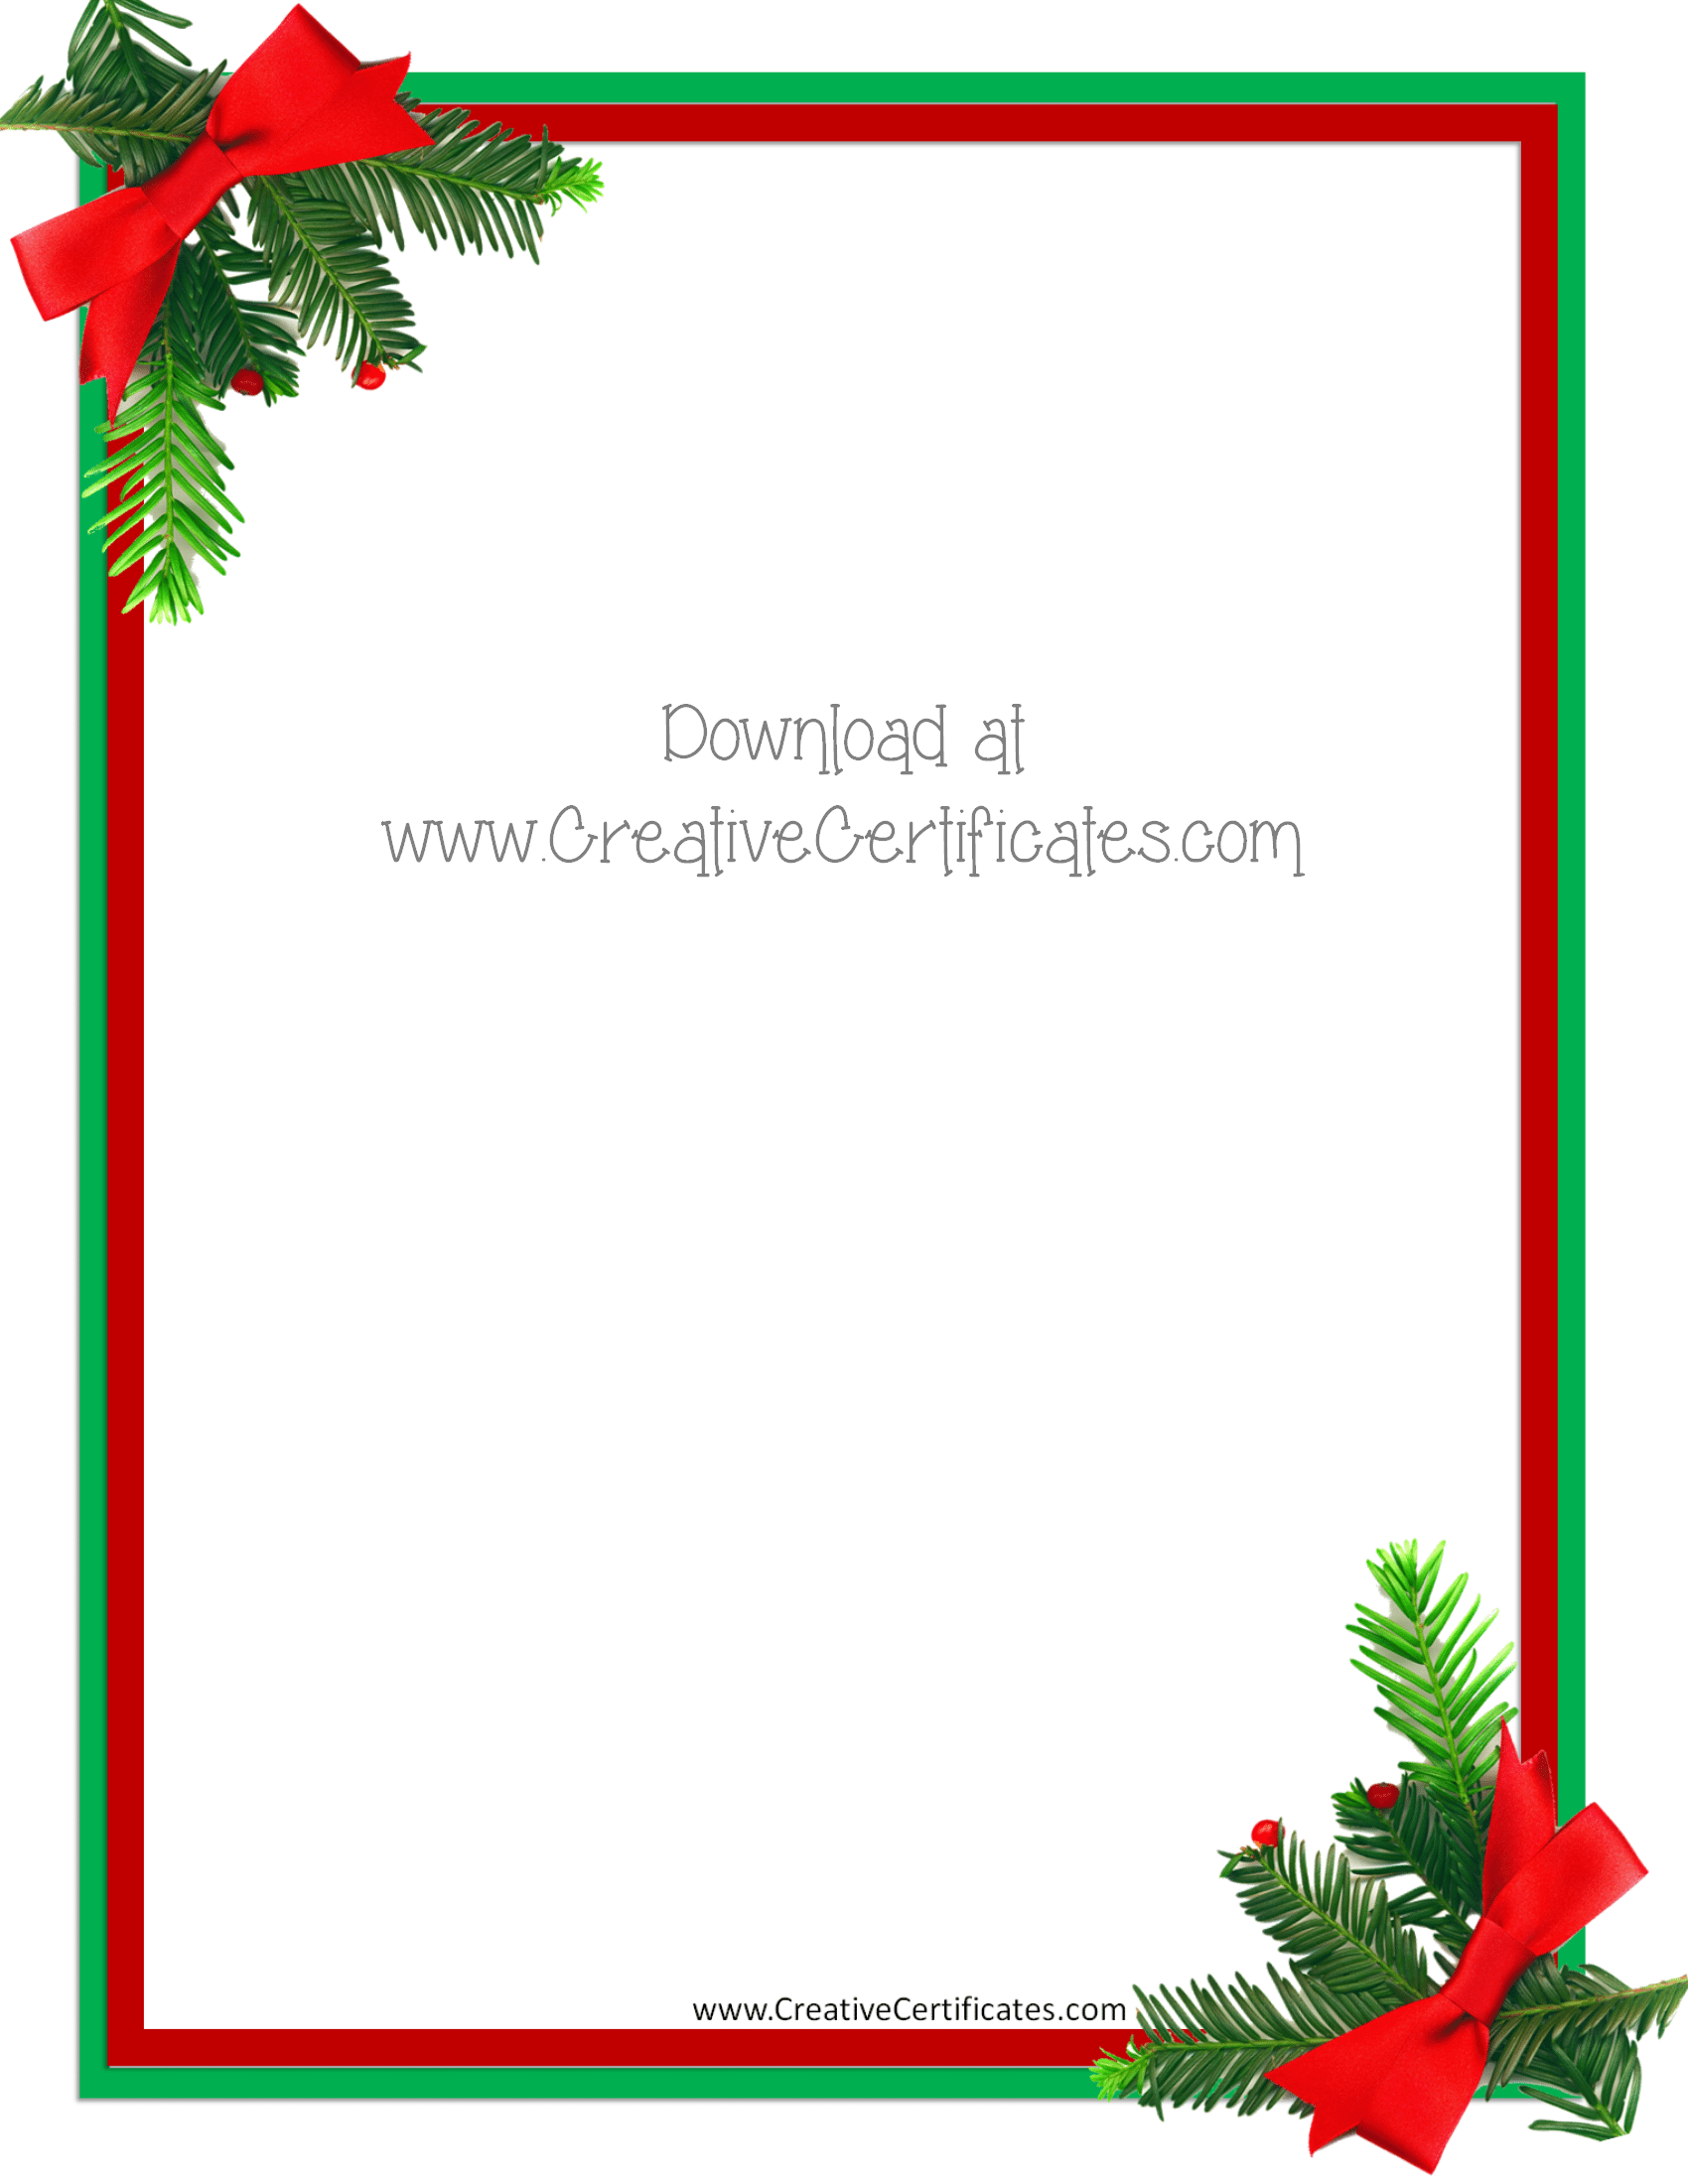 Free Christmas Border Templates Customize Online then Download